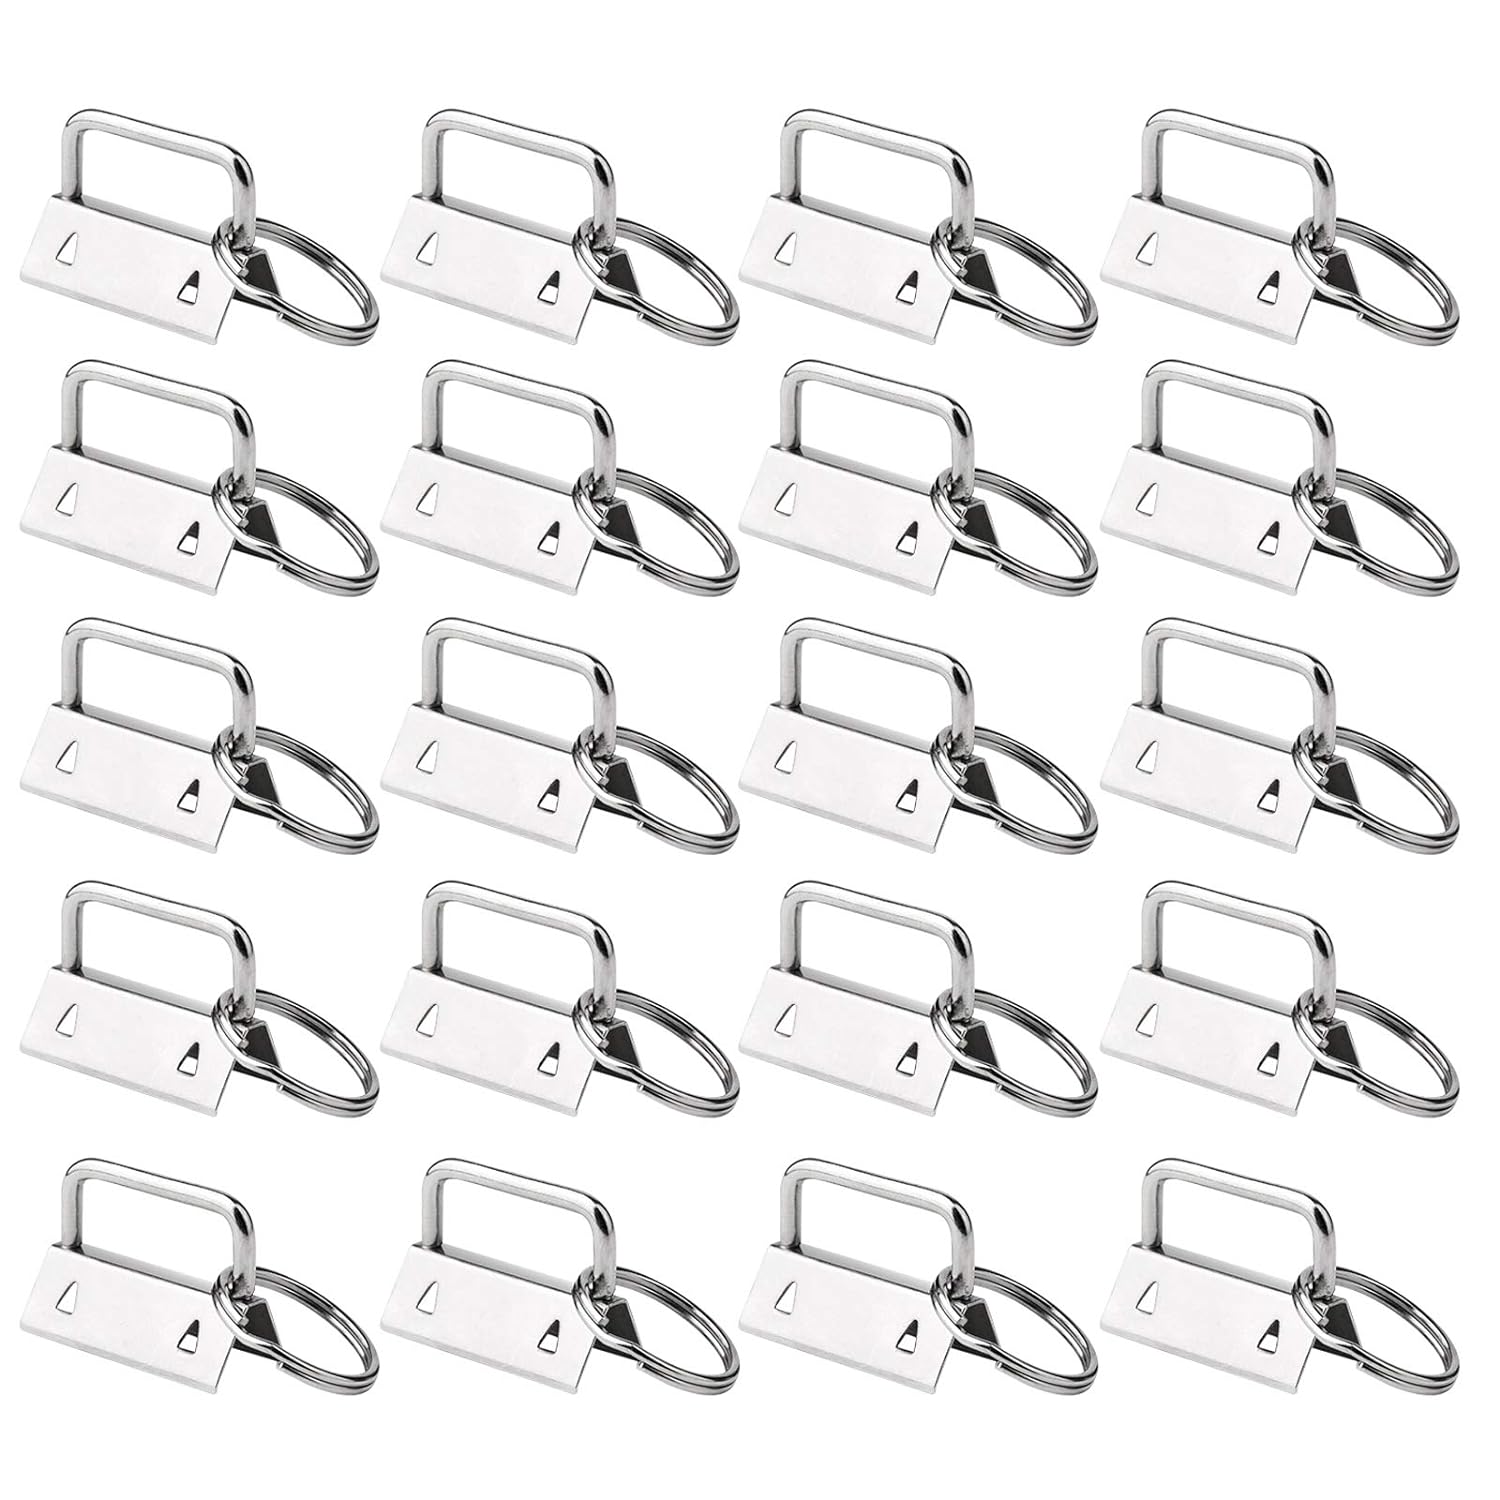 Great Choice Products 50 Sets Key Fob Hardware Key Fob Keychain Wristlet With Split Ring 0.8 Inch